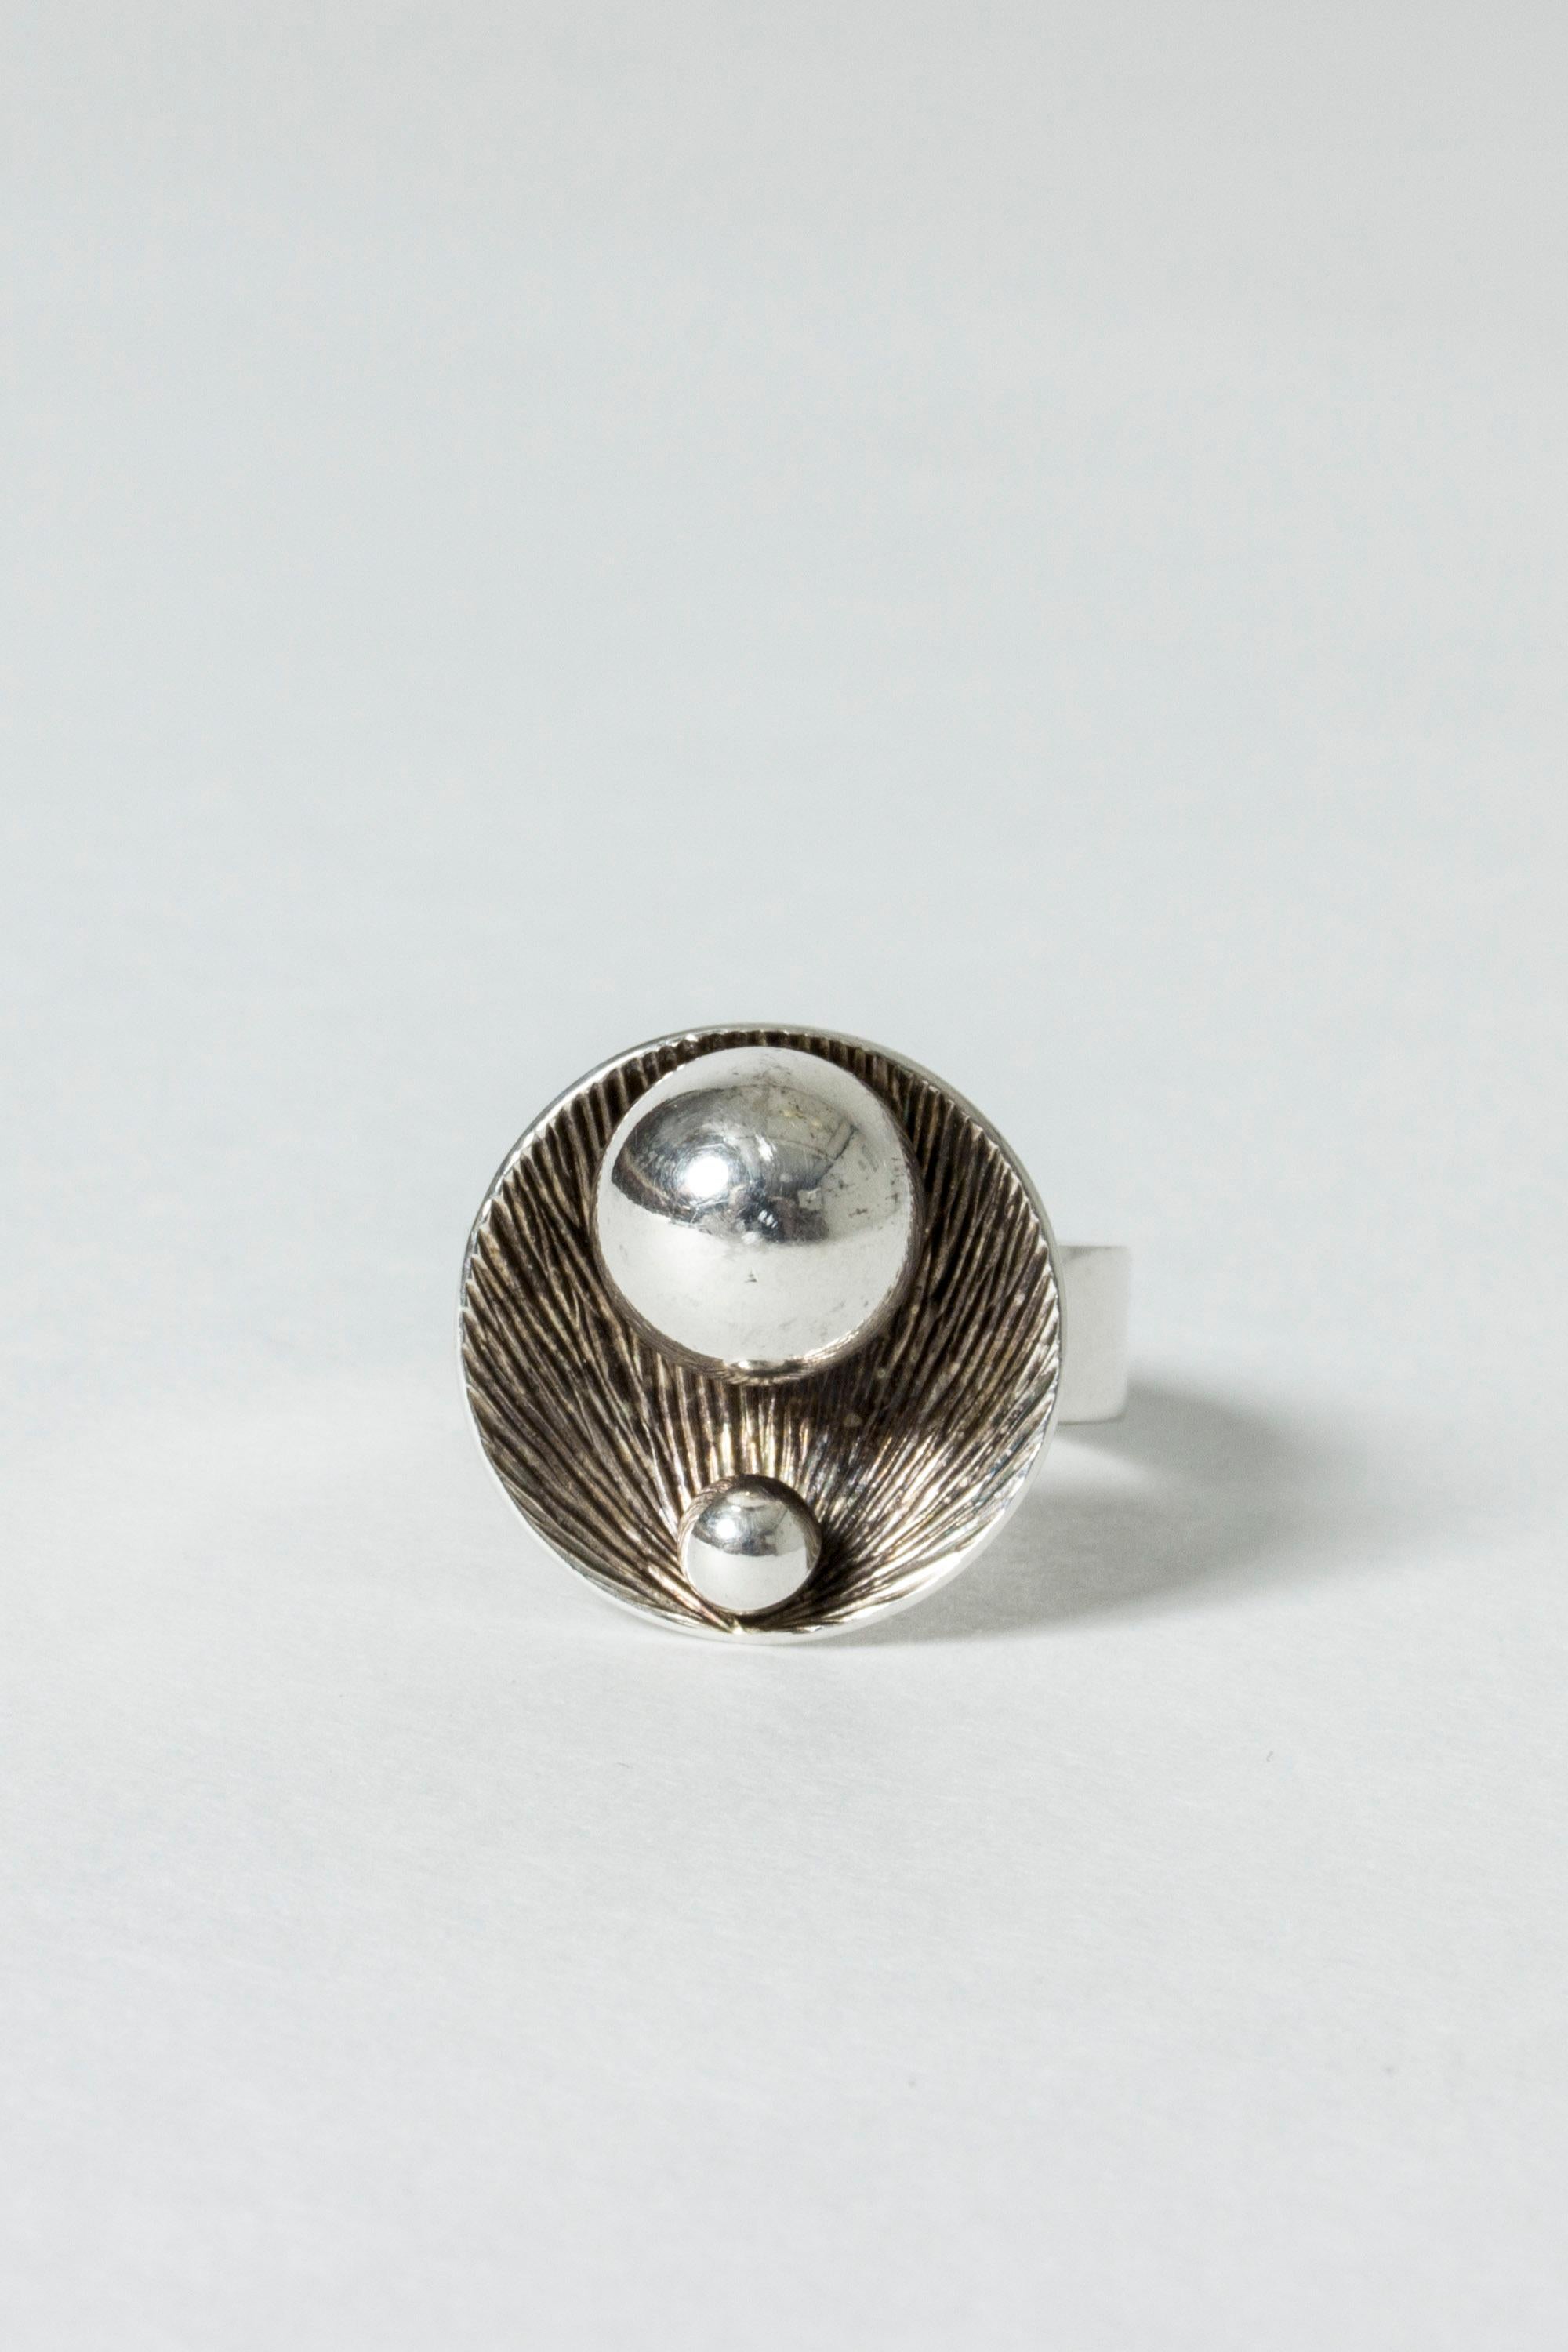 Beautiful silver ring by Elis Kauppi, with a modernist motif of a shell holding two silver pearls. Appealing, round proportions, concave shell form. The etched pattern plays with the light and enhances the shine of the two pearls. Sensitively